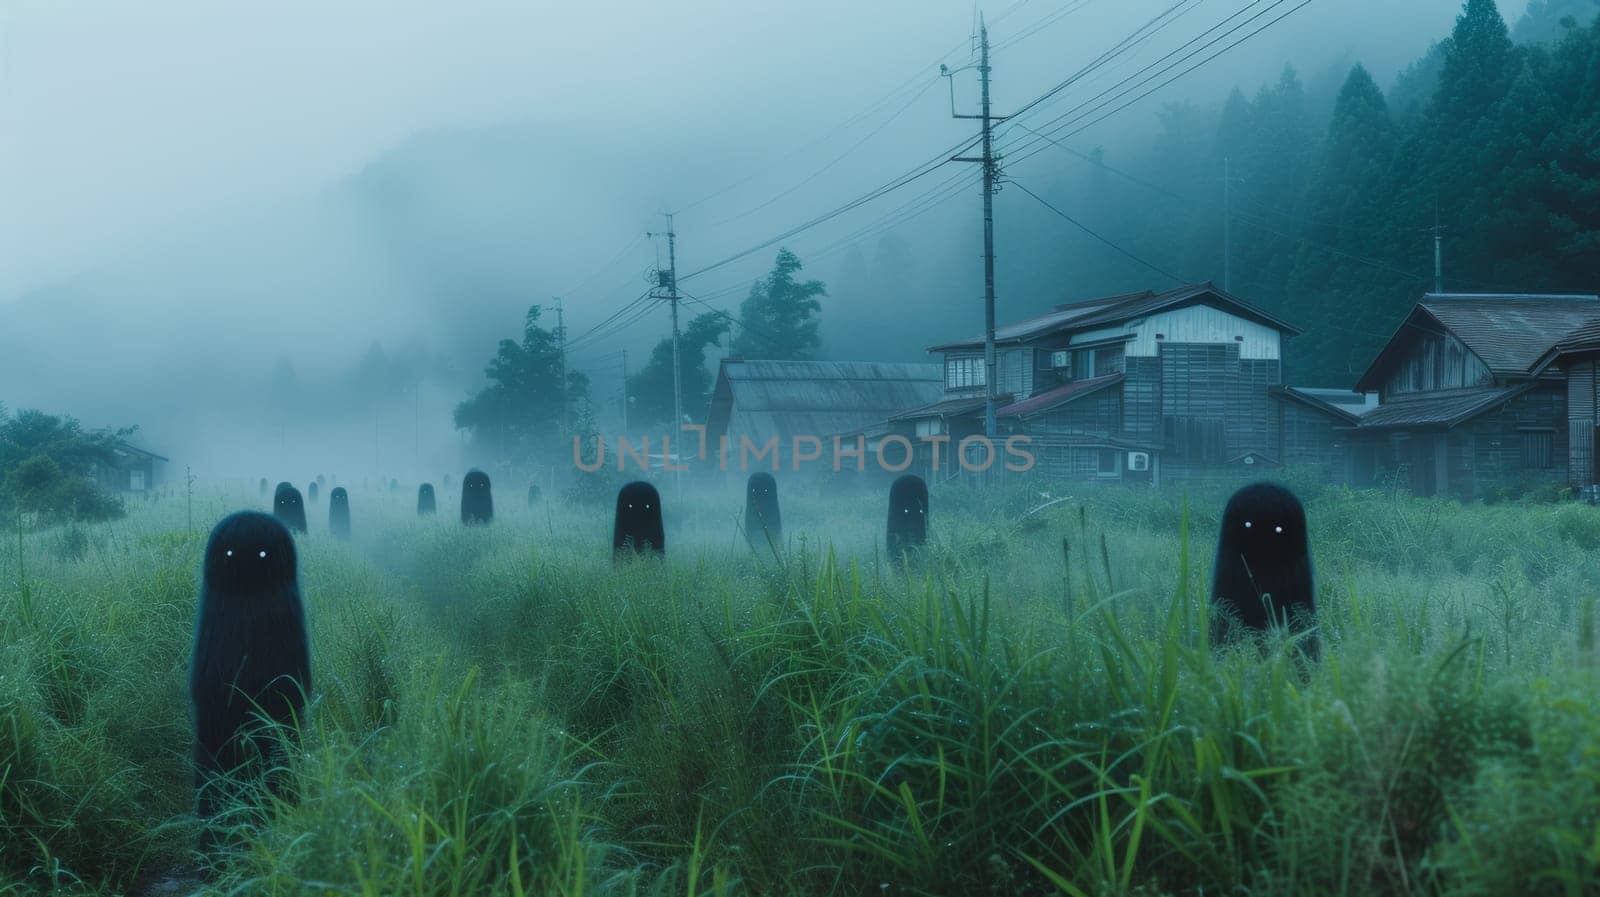 A group of black figures standing in a field with fog